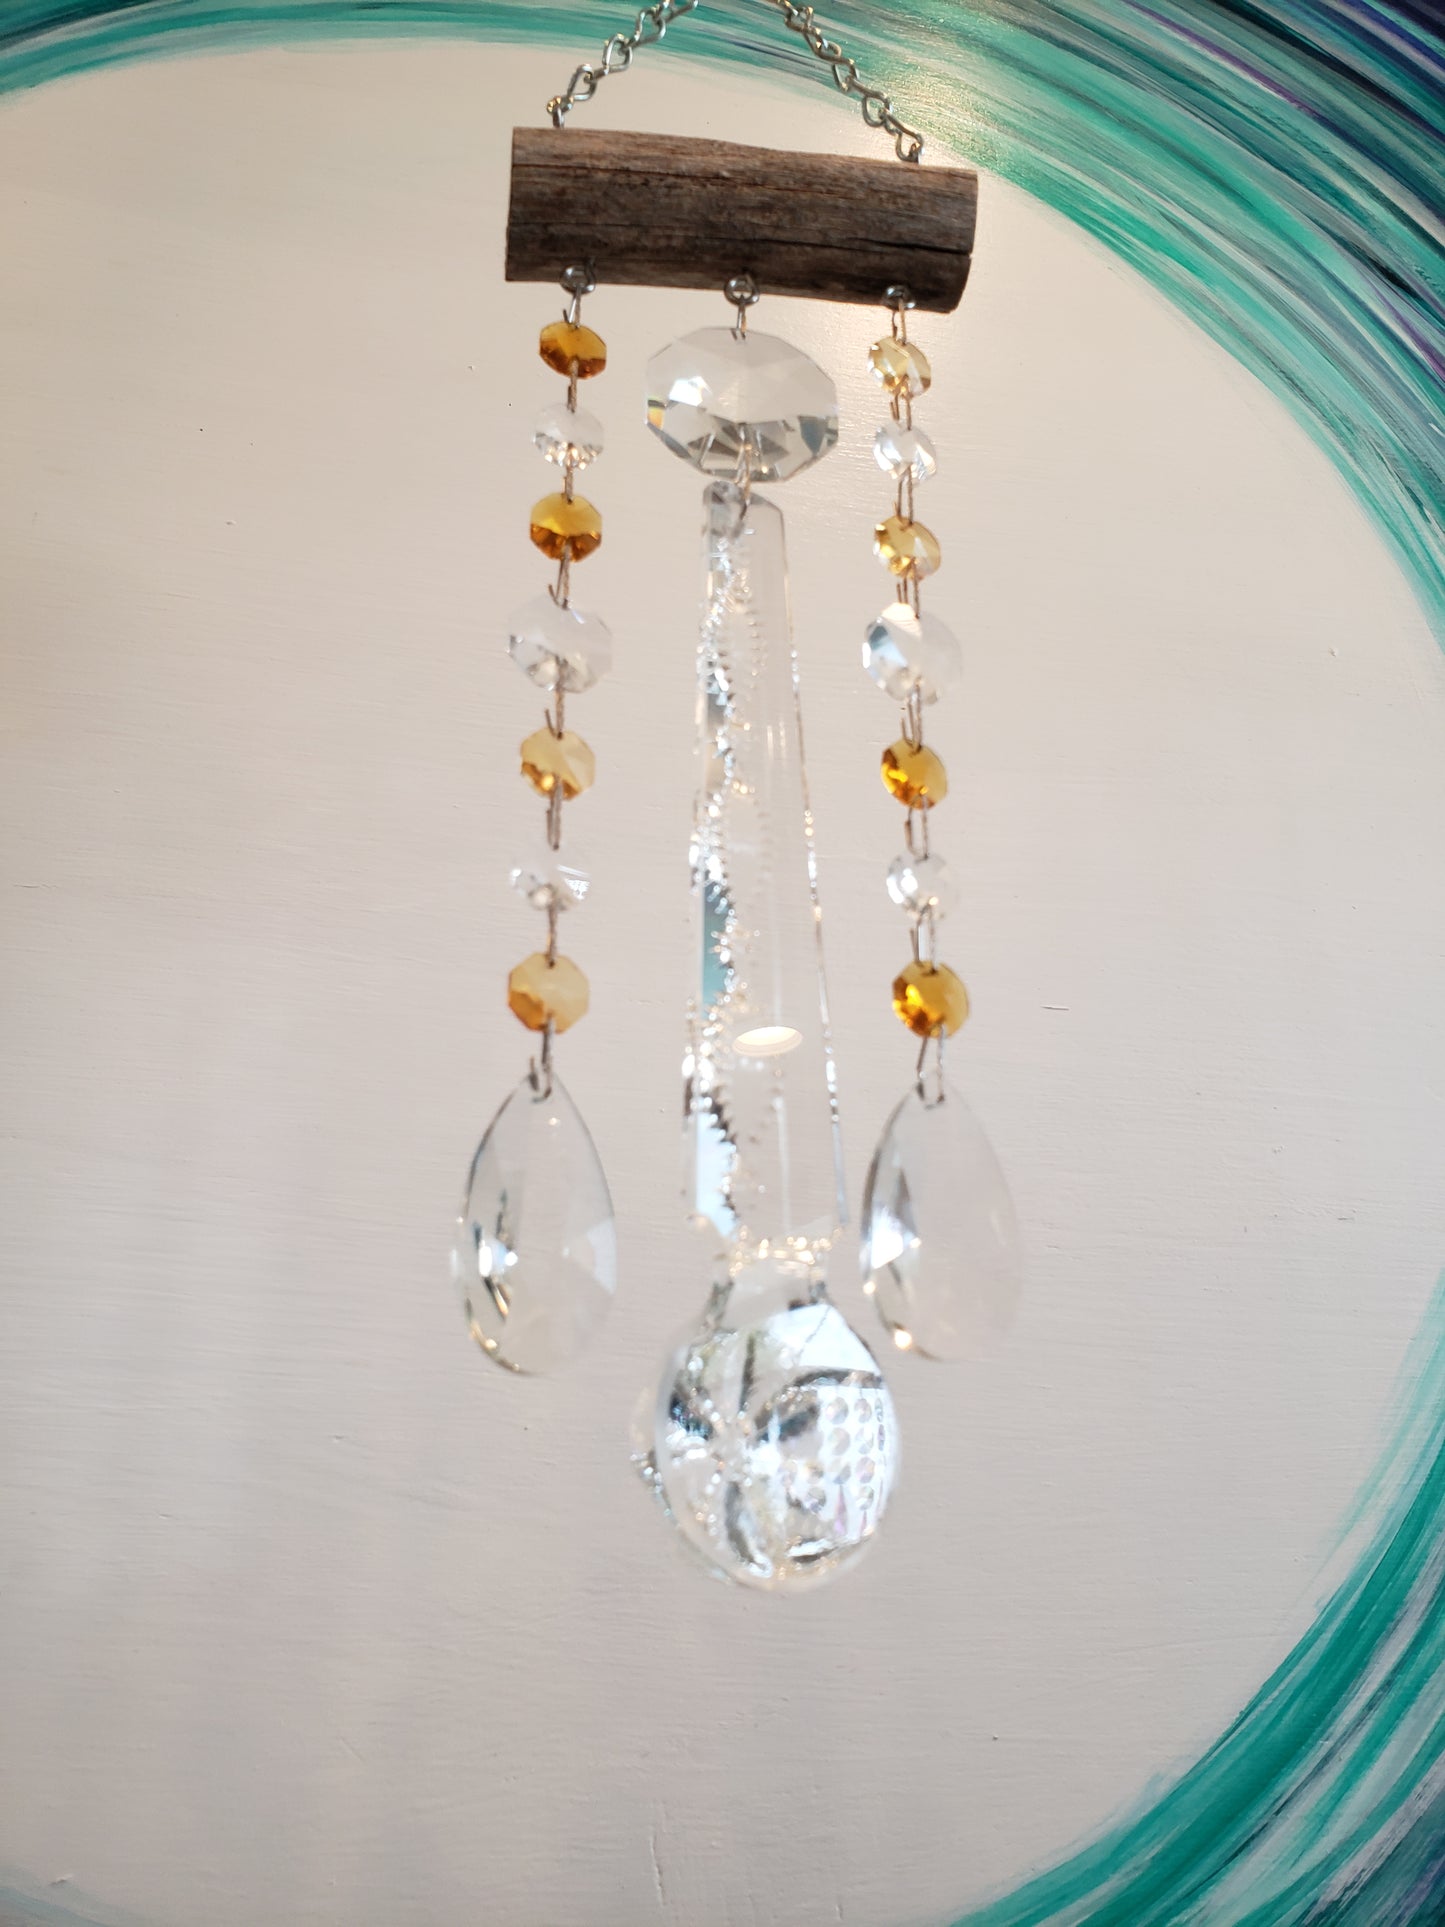 Hand made crystal windchime suncatcher gifts by Dazzling Driftwood, located in Auburndale FL